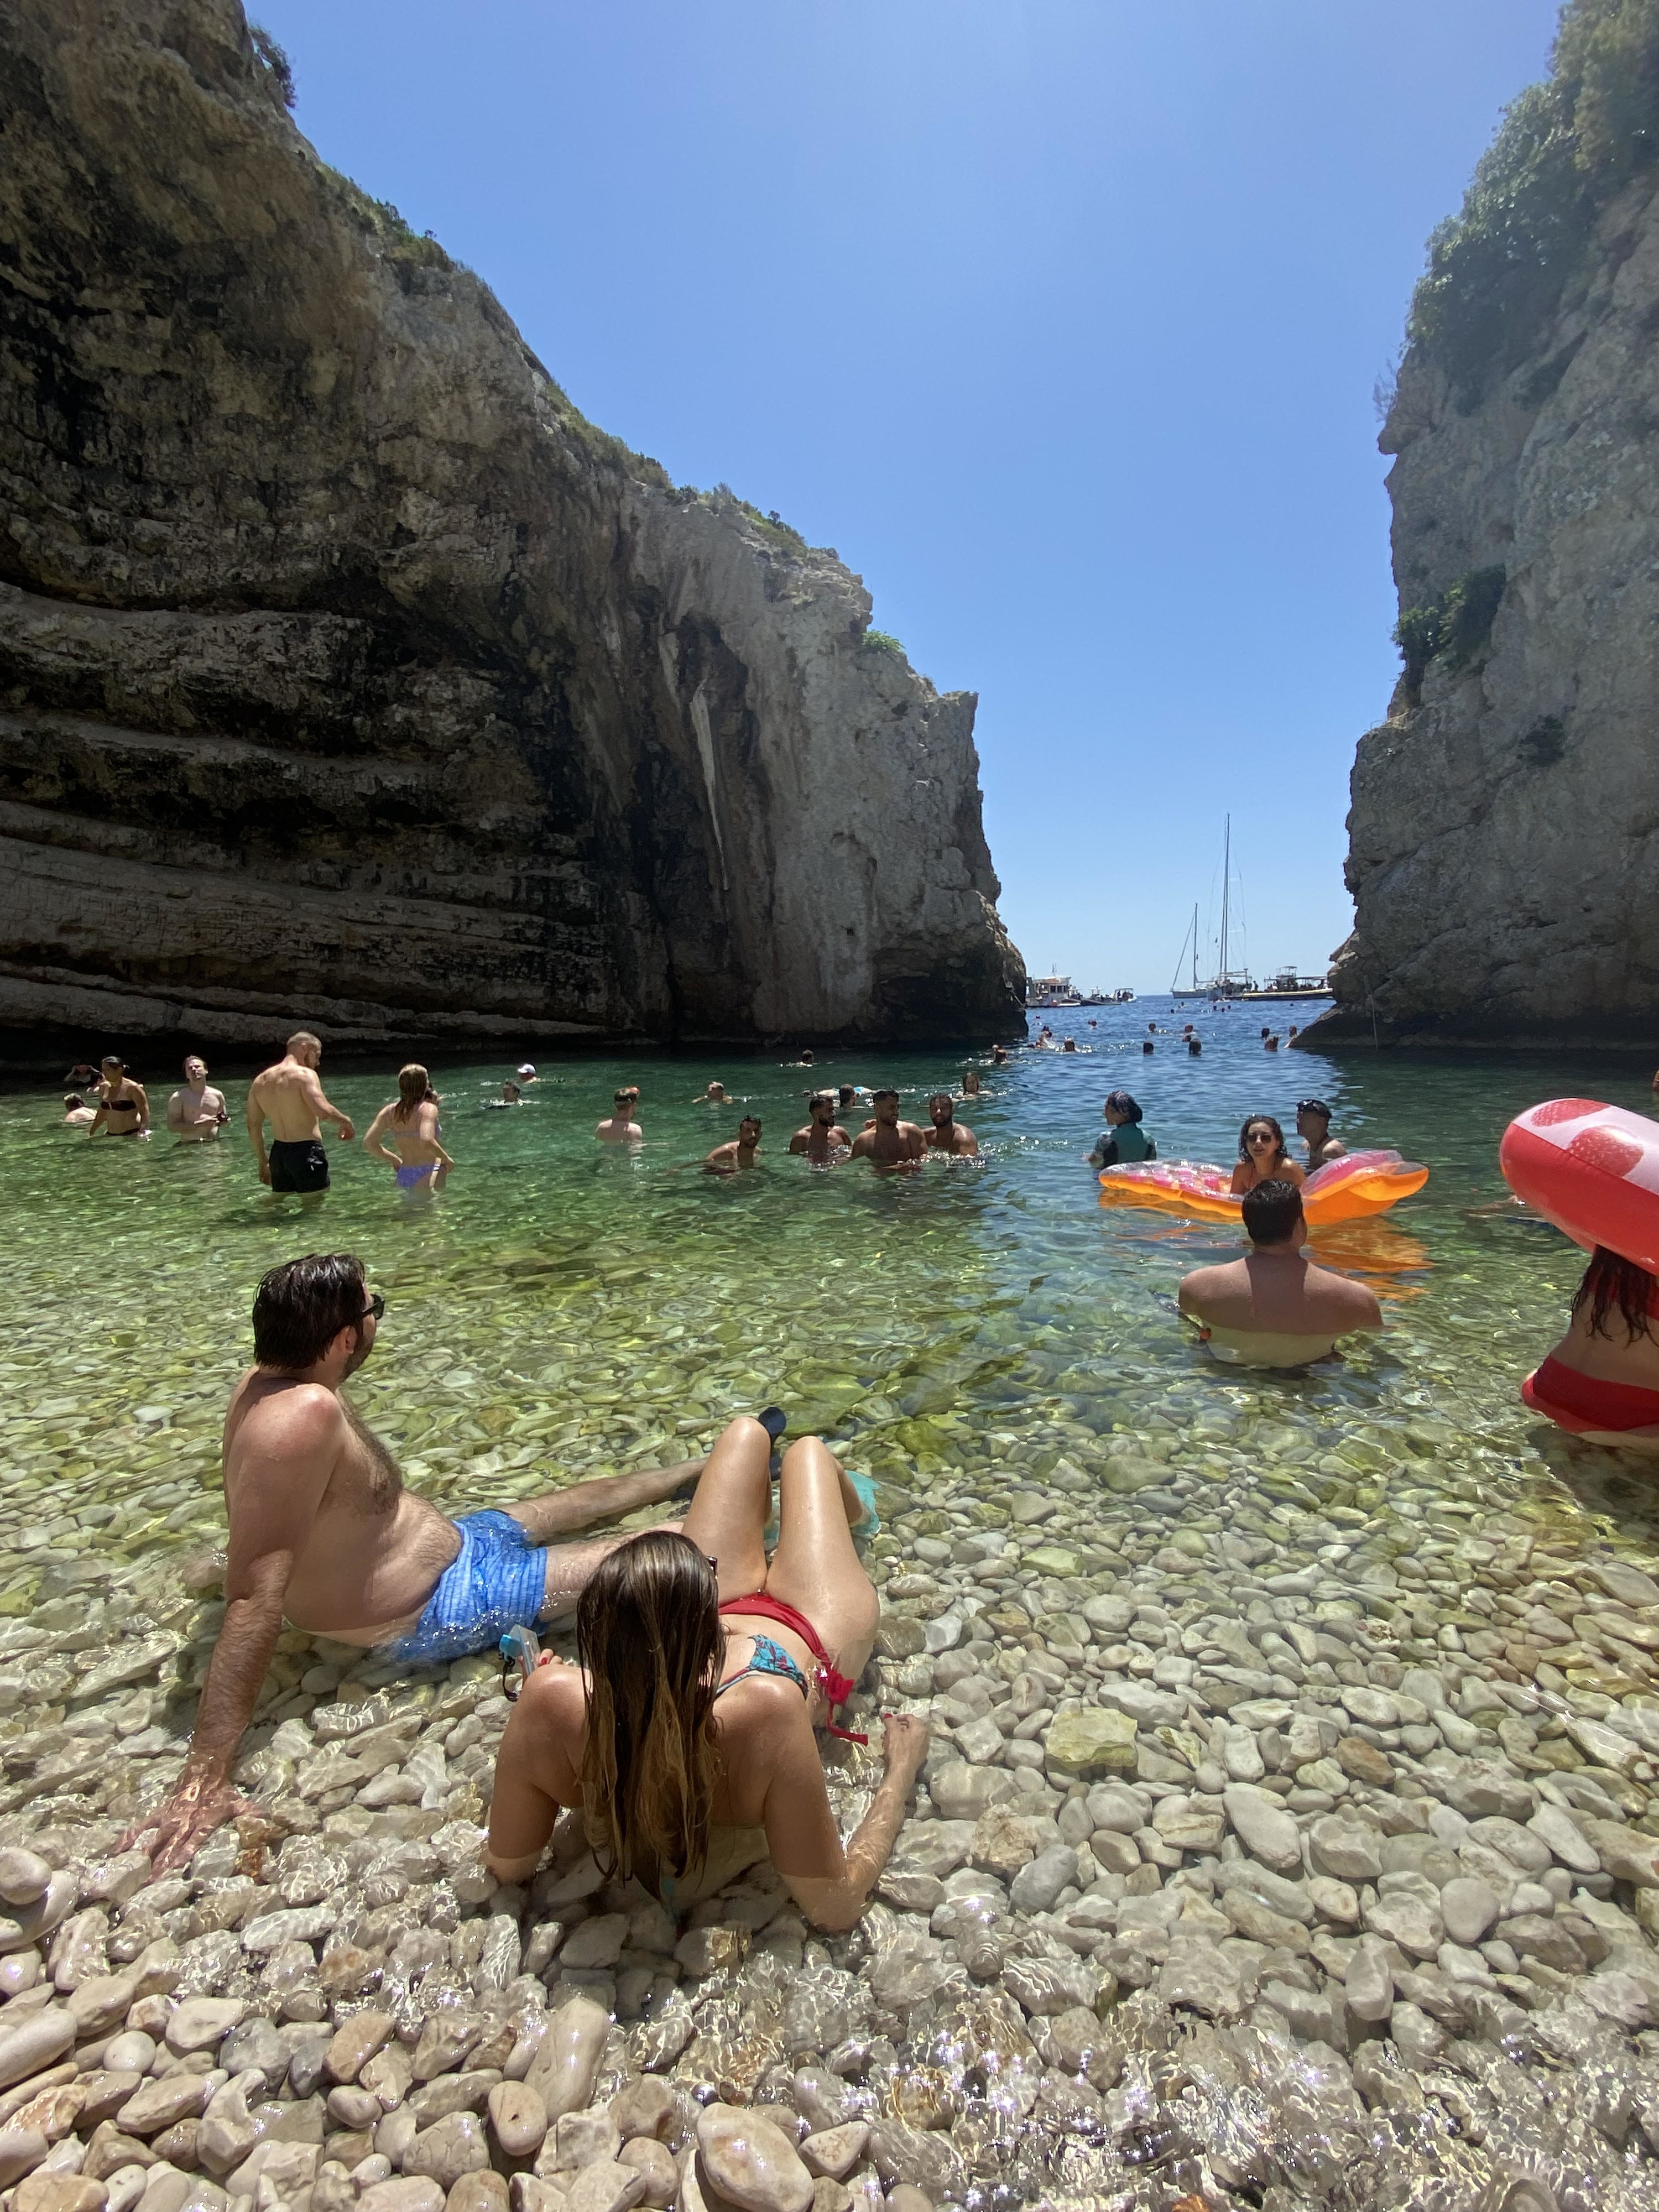 beach in Croatia with lots of people sitting or floating in the shallow water